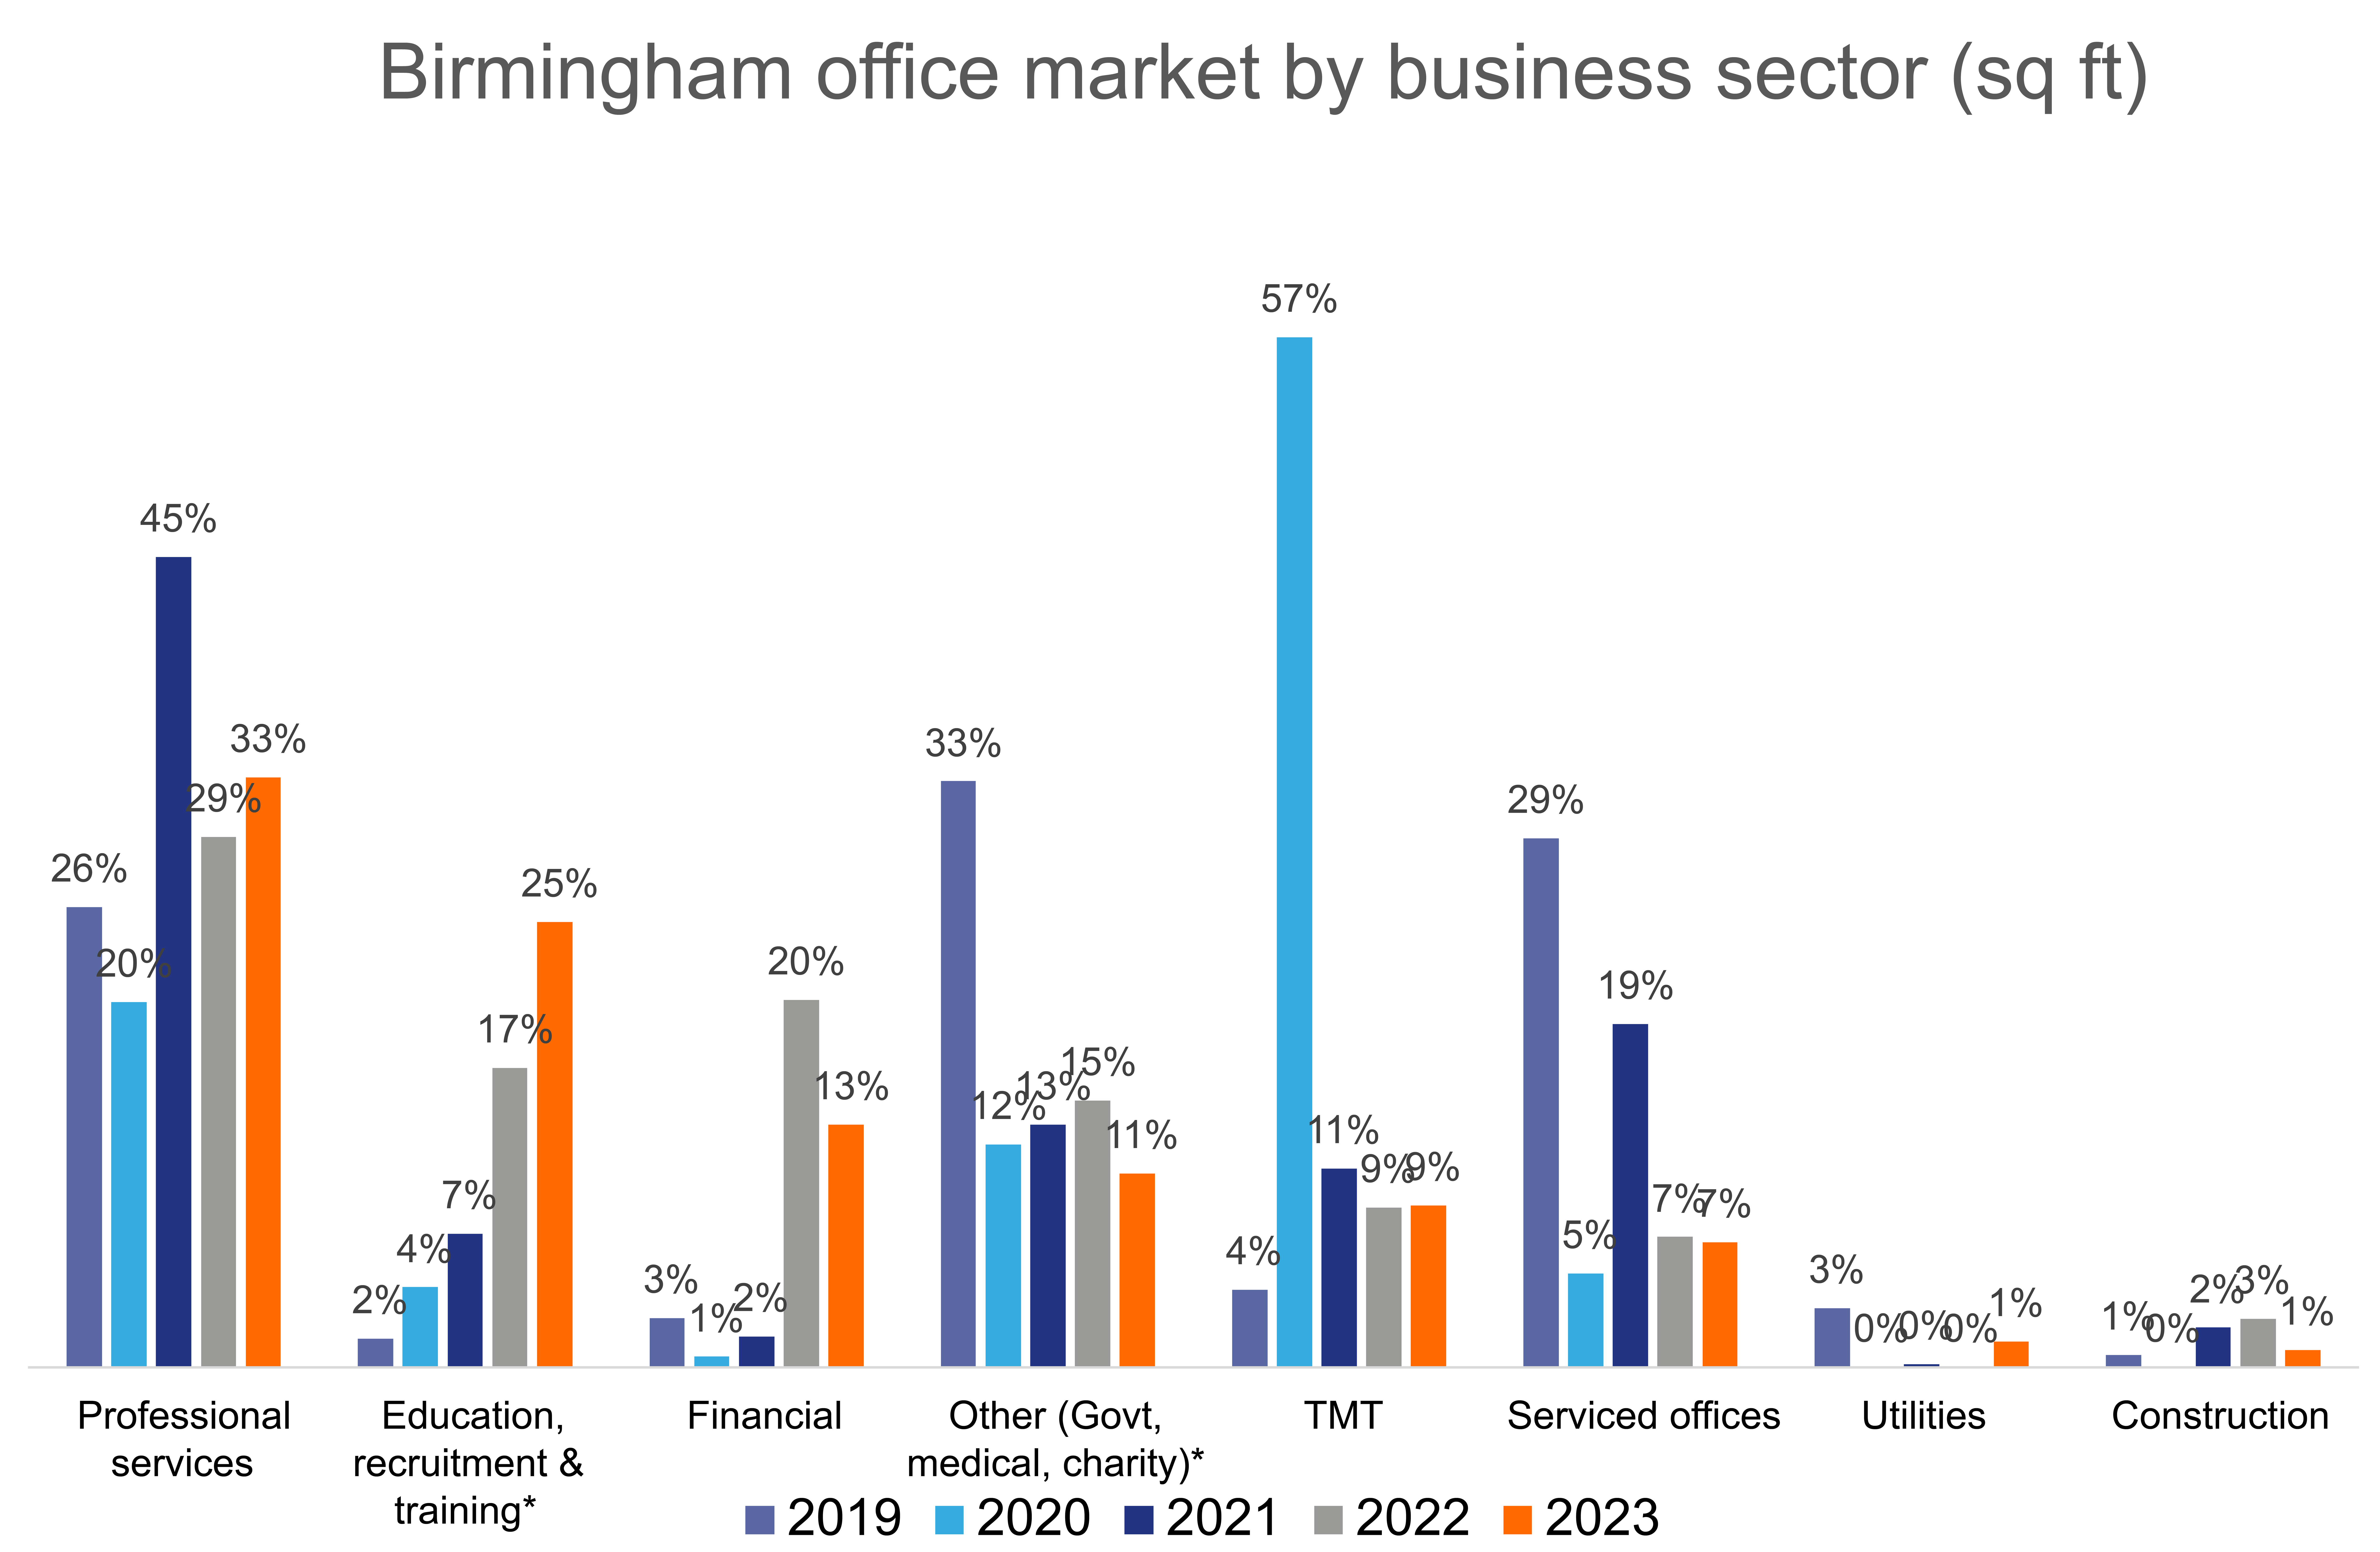 Graph showing Birmingham office market take-up by business sector over the last 5 years